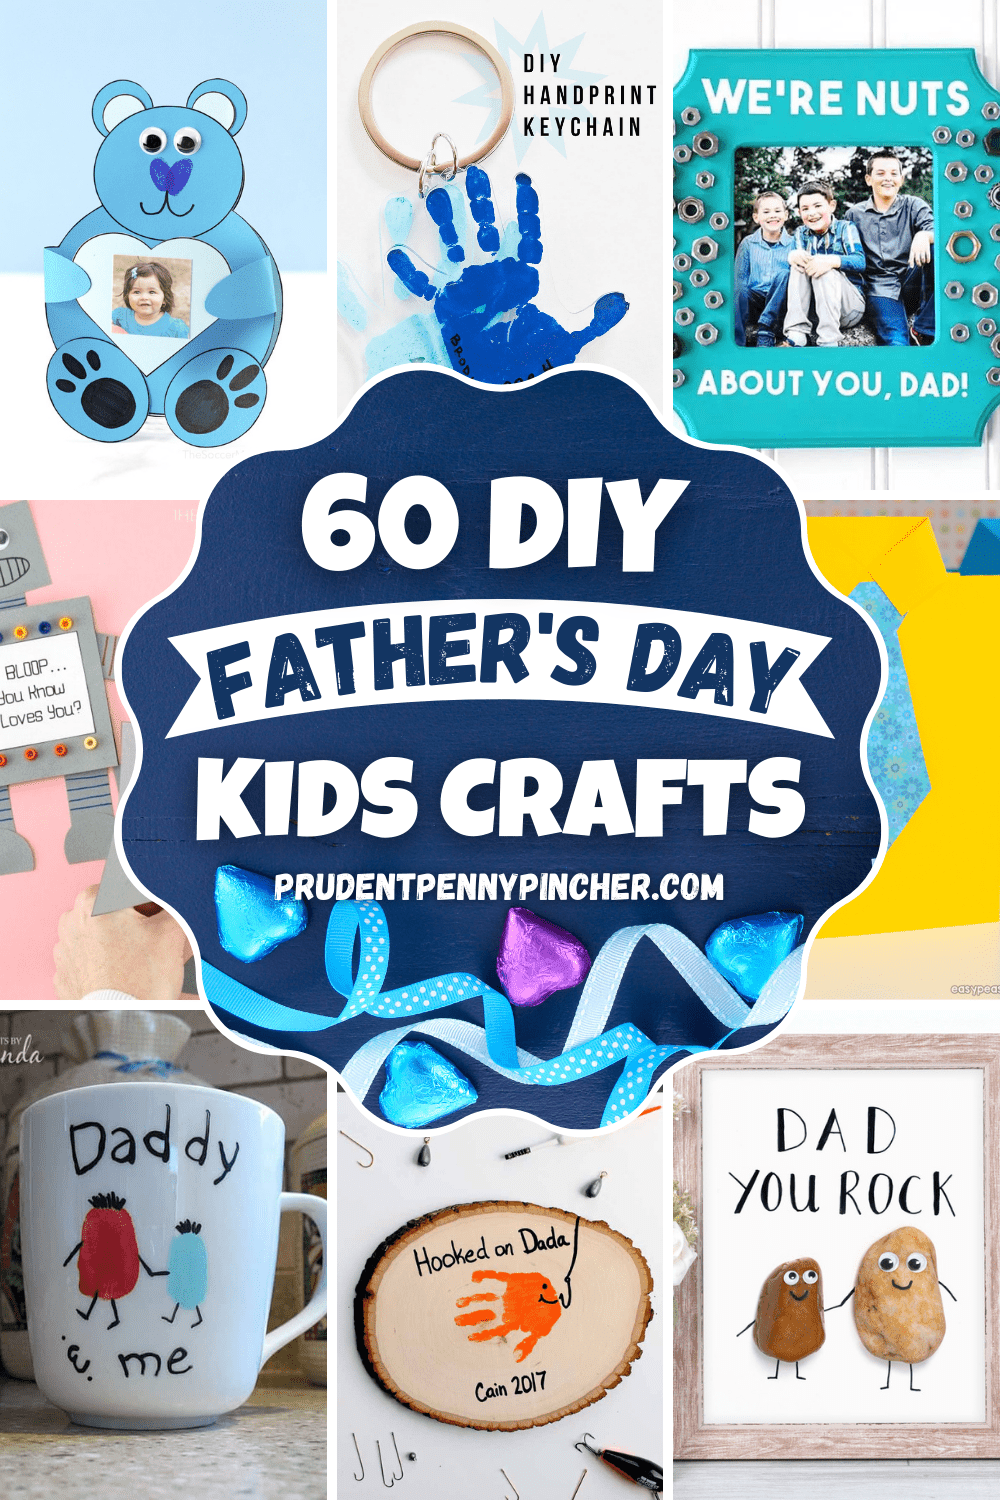 Cute Toolbox Printable Fathers Day Craft - Free Printable!